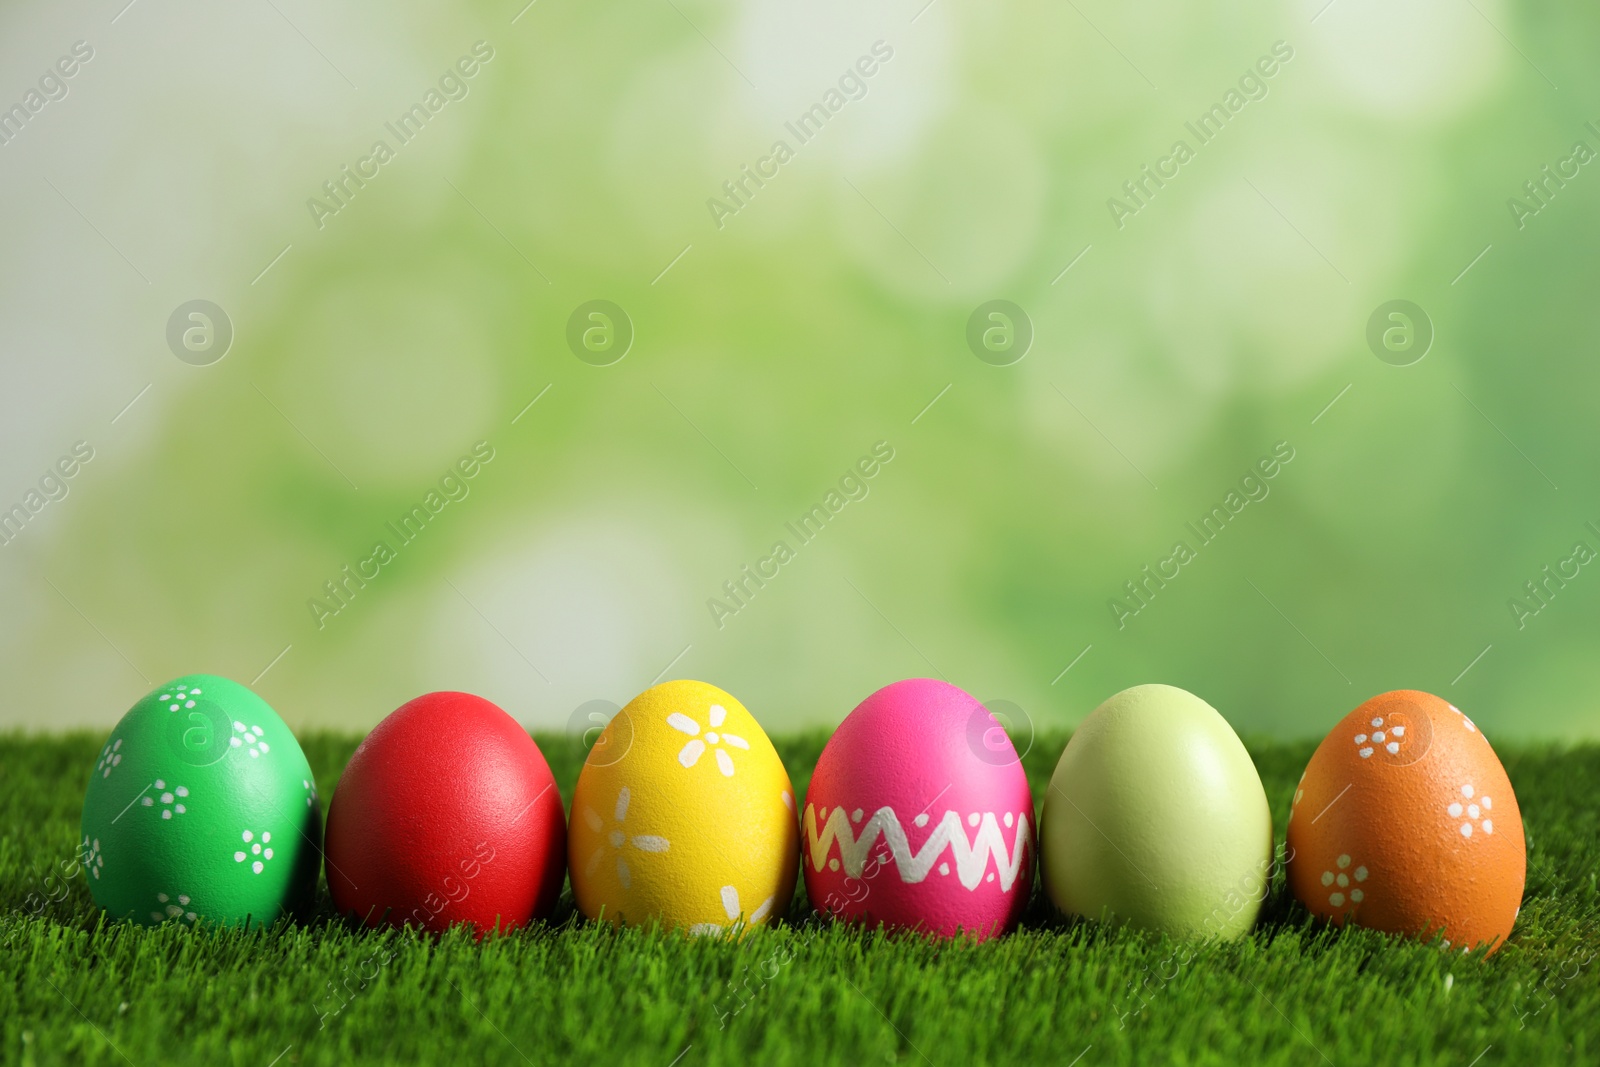 Photo of Colorful Easter eggs on green grass against blurred background. Space for text